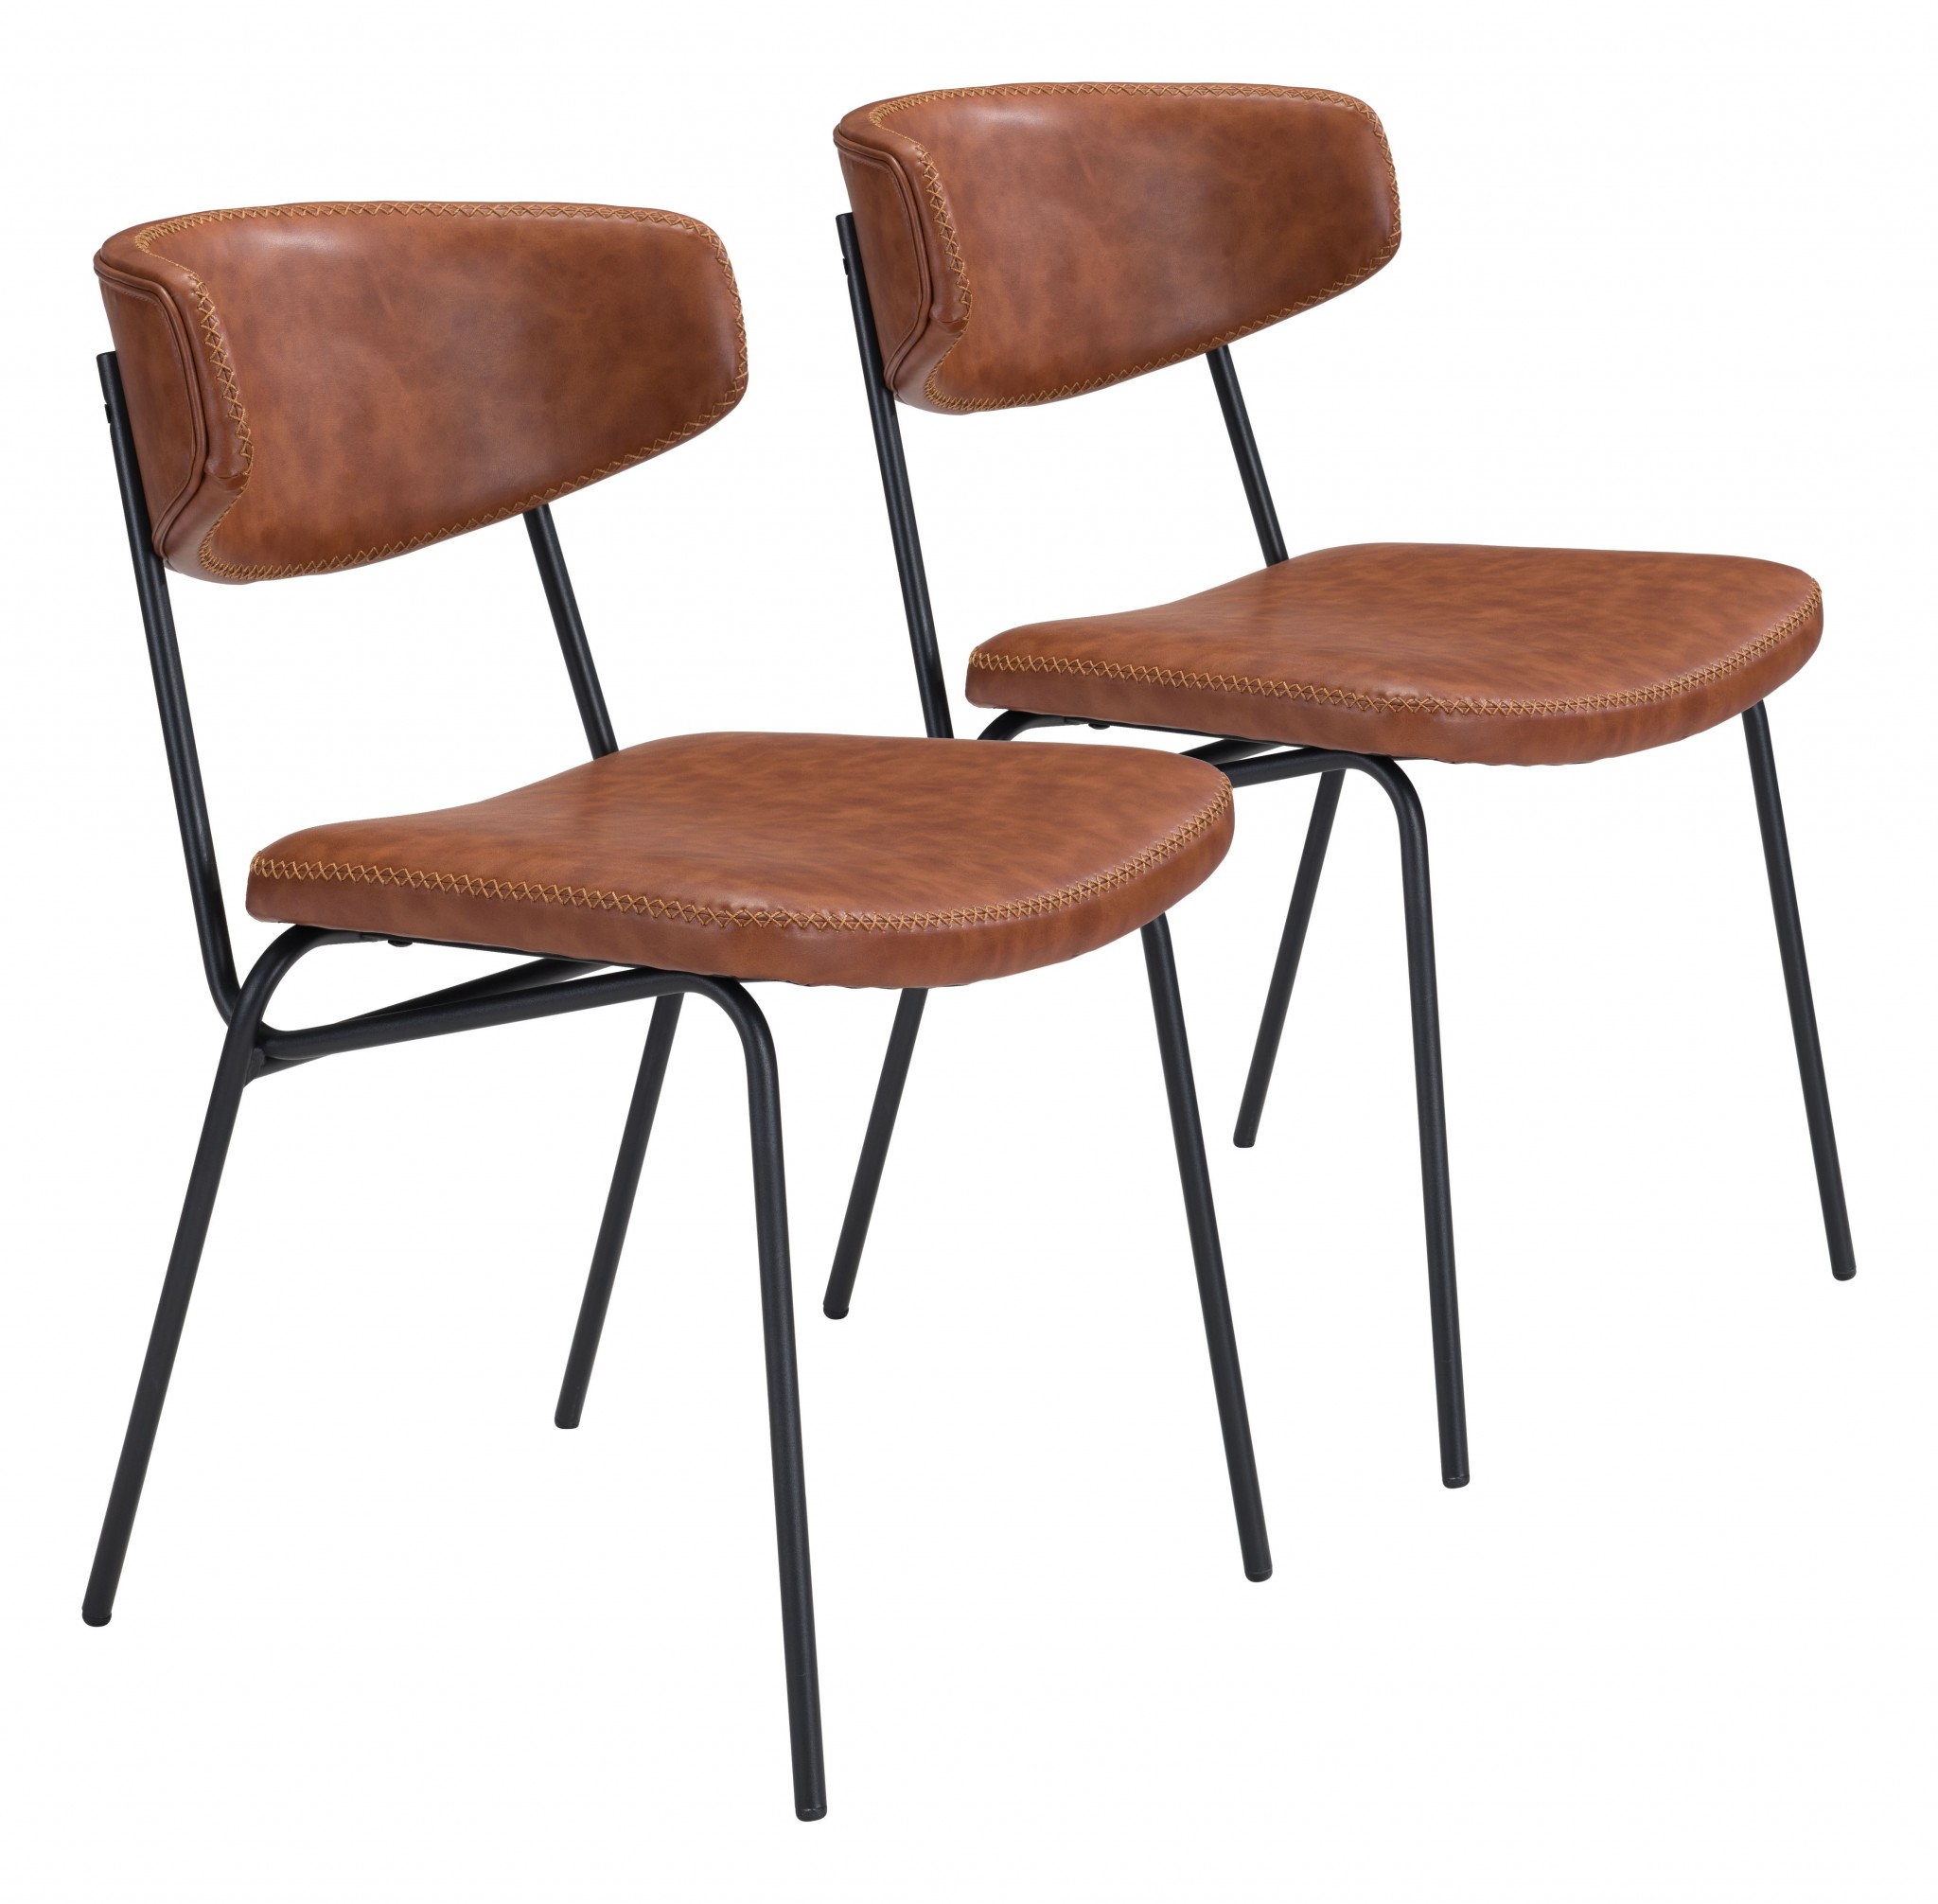 Set of Two Modern Minimalist Vintage Look Brown Dining Chairs